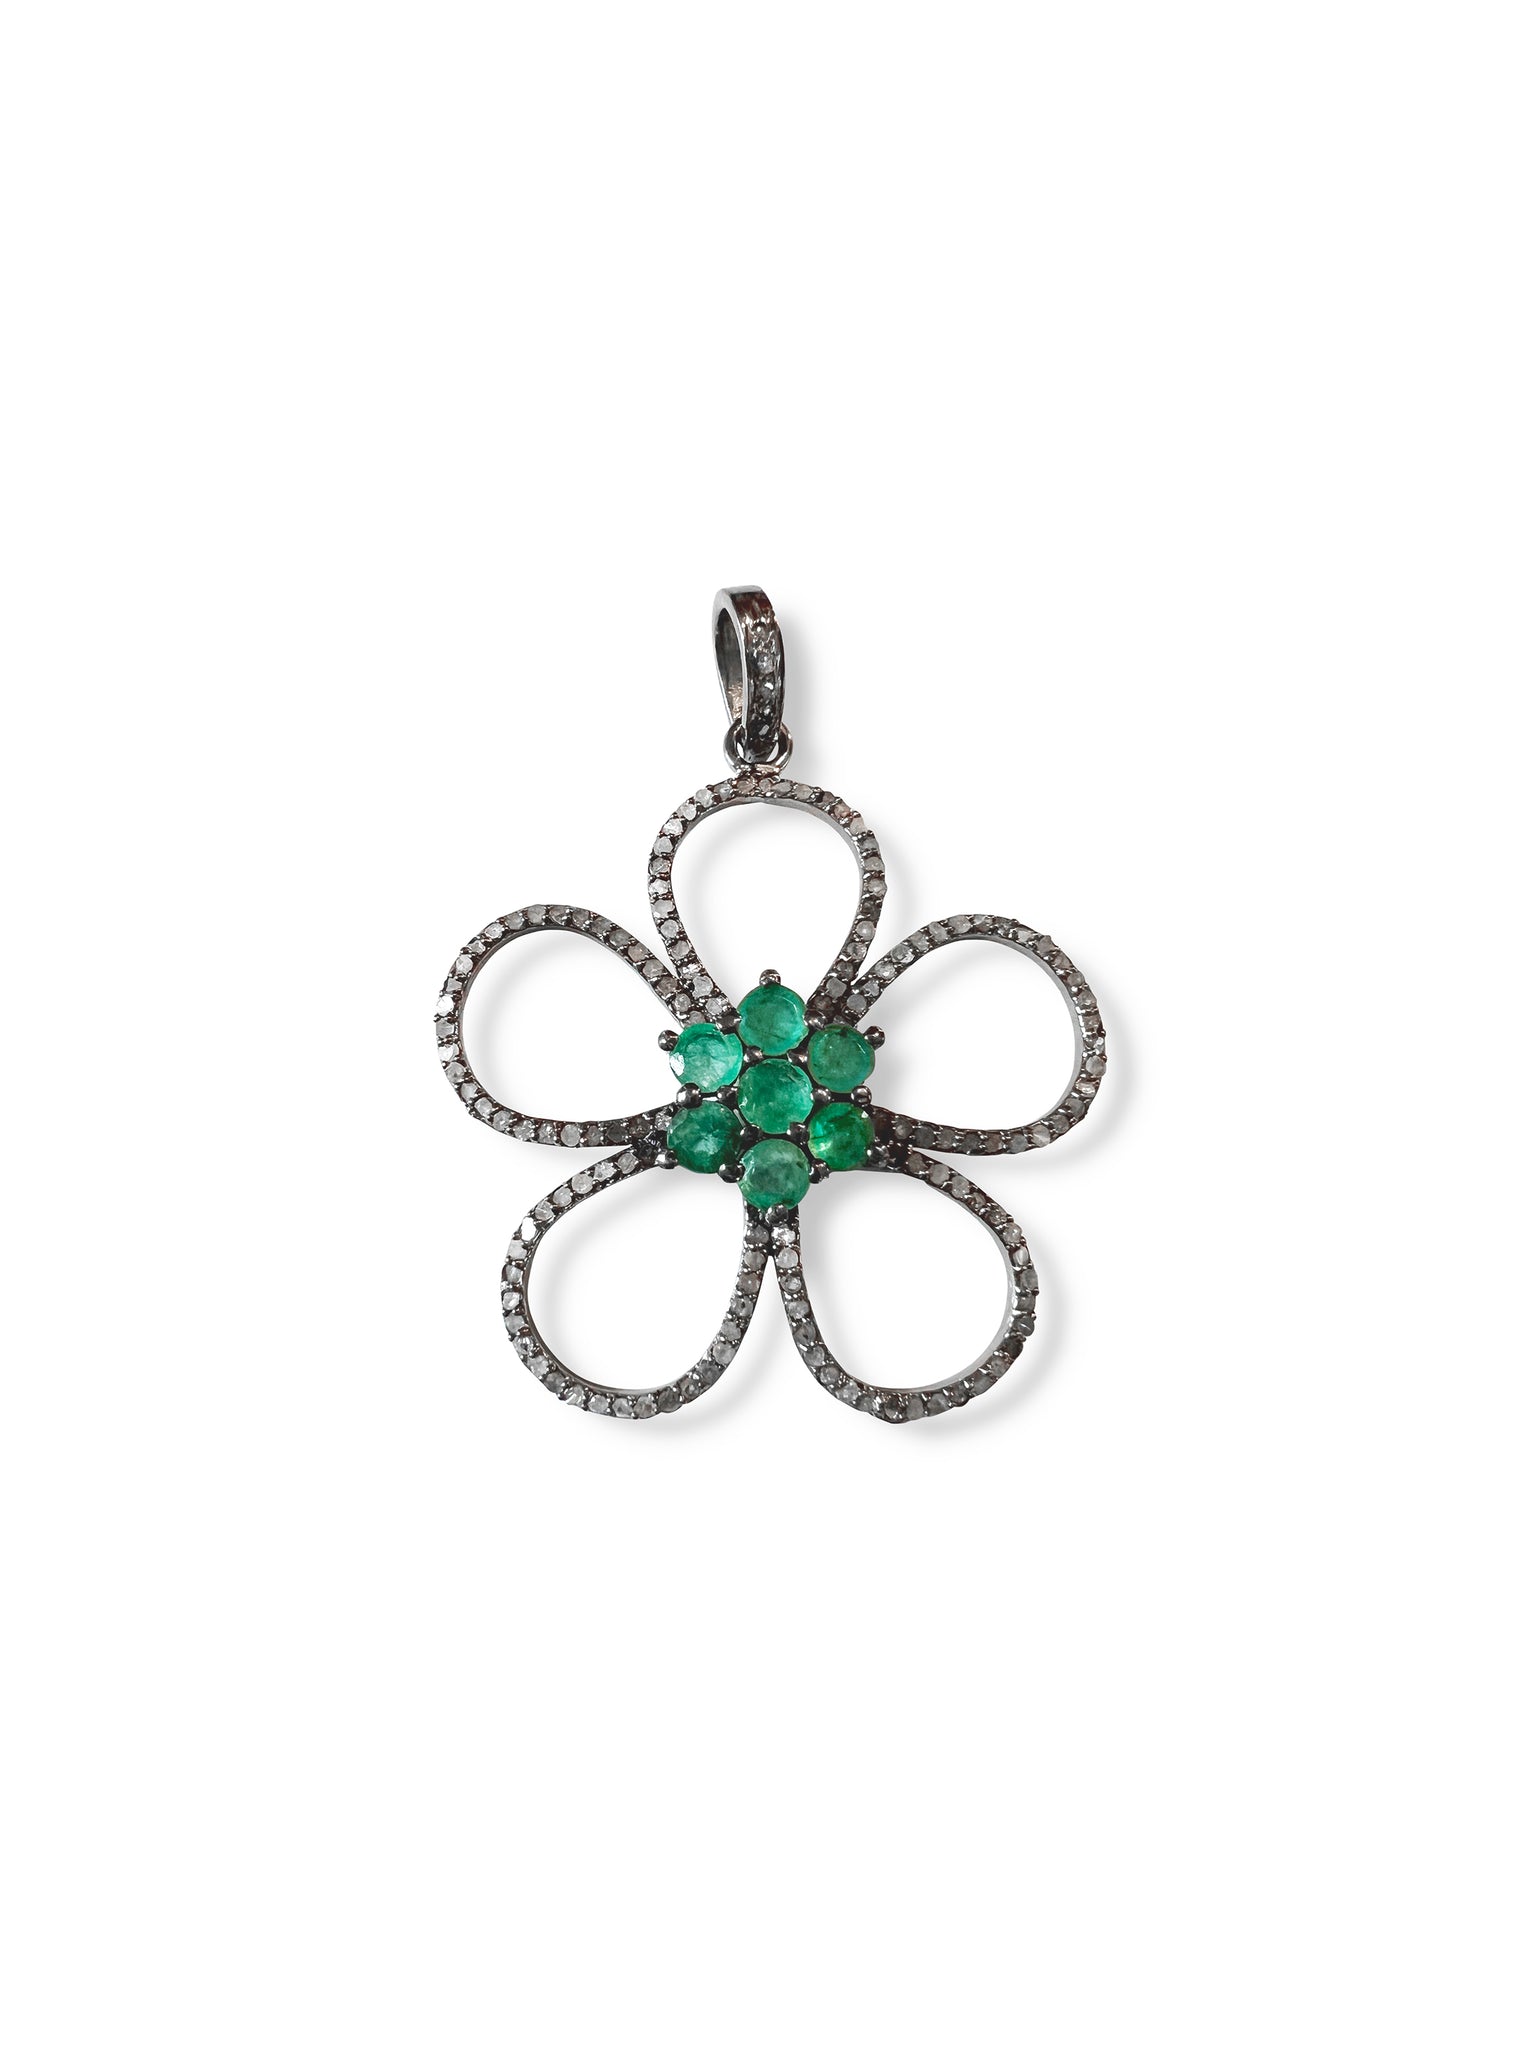 Pave Diamond Flower with Emerald Flower Center set in Sterling Silver